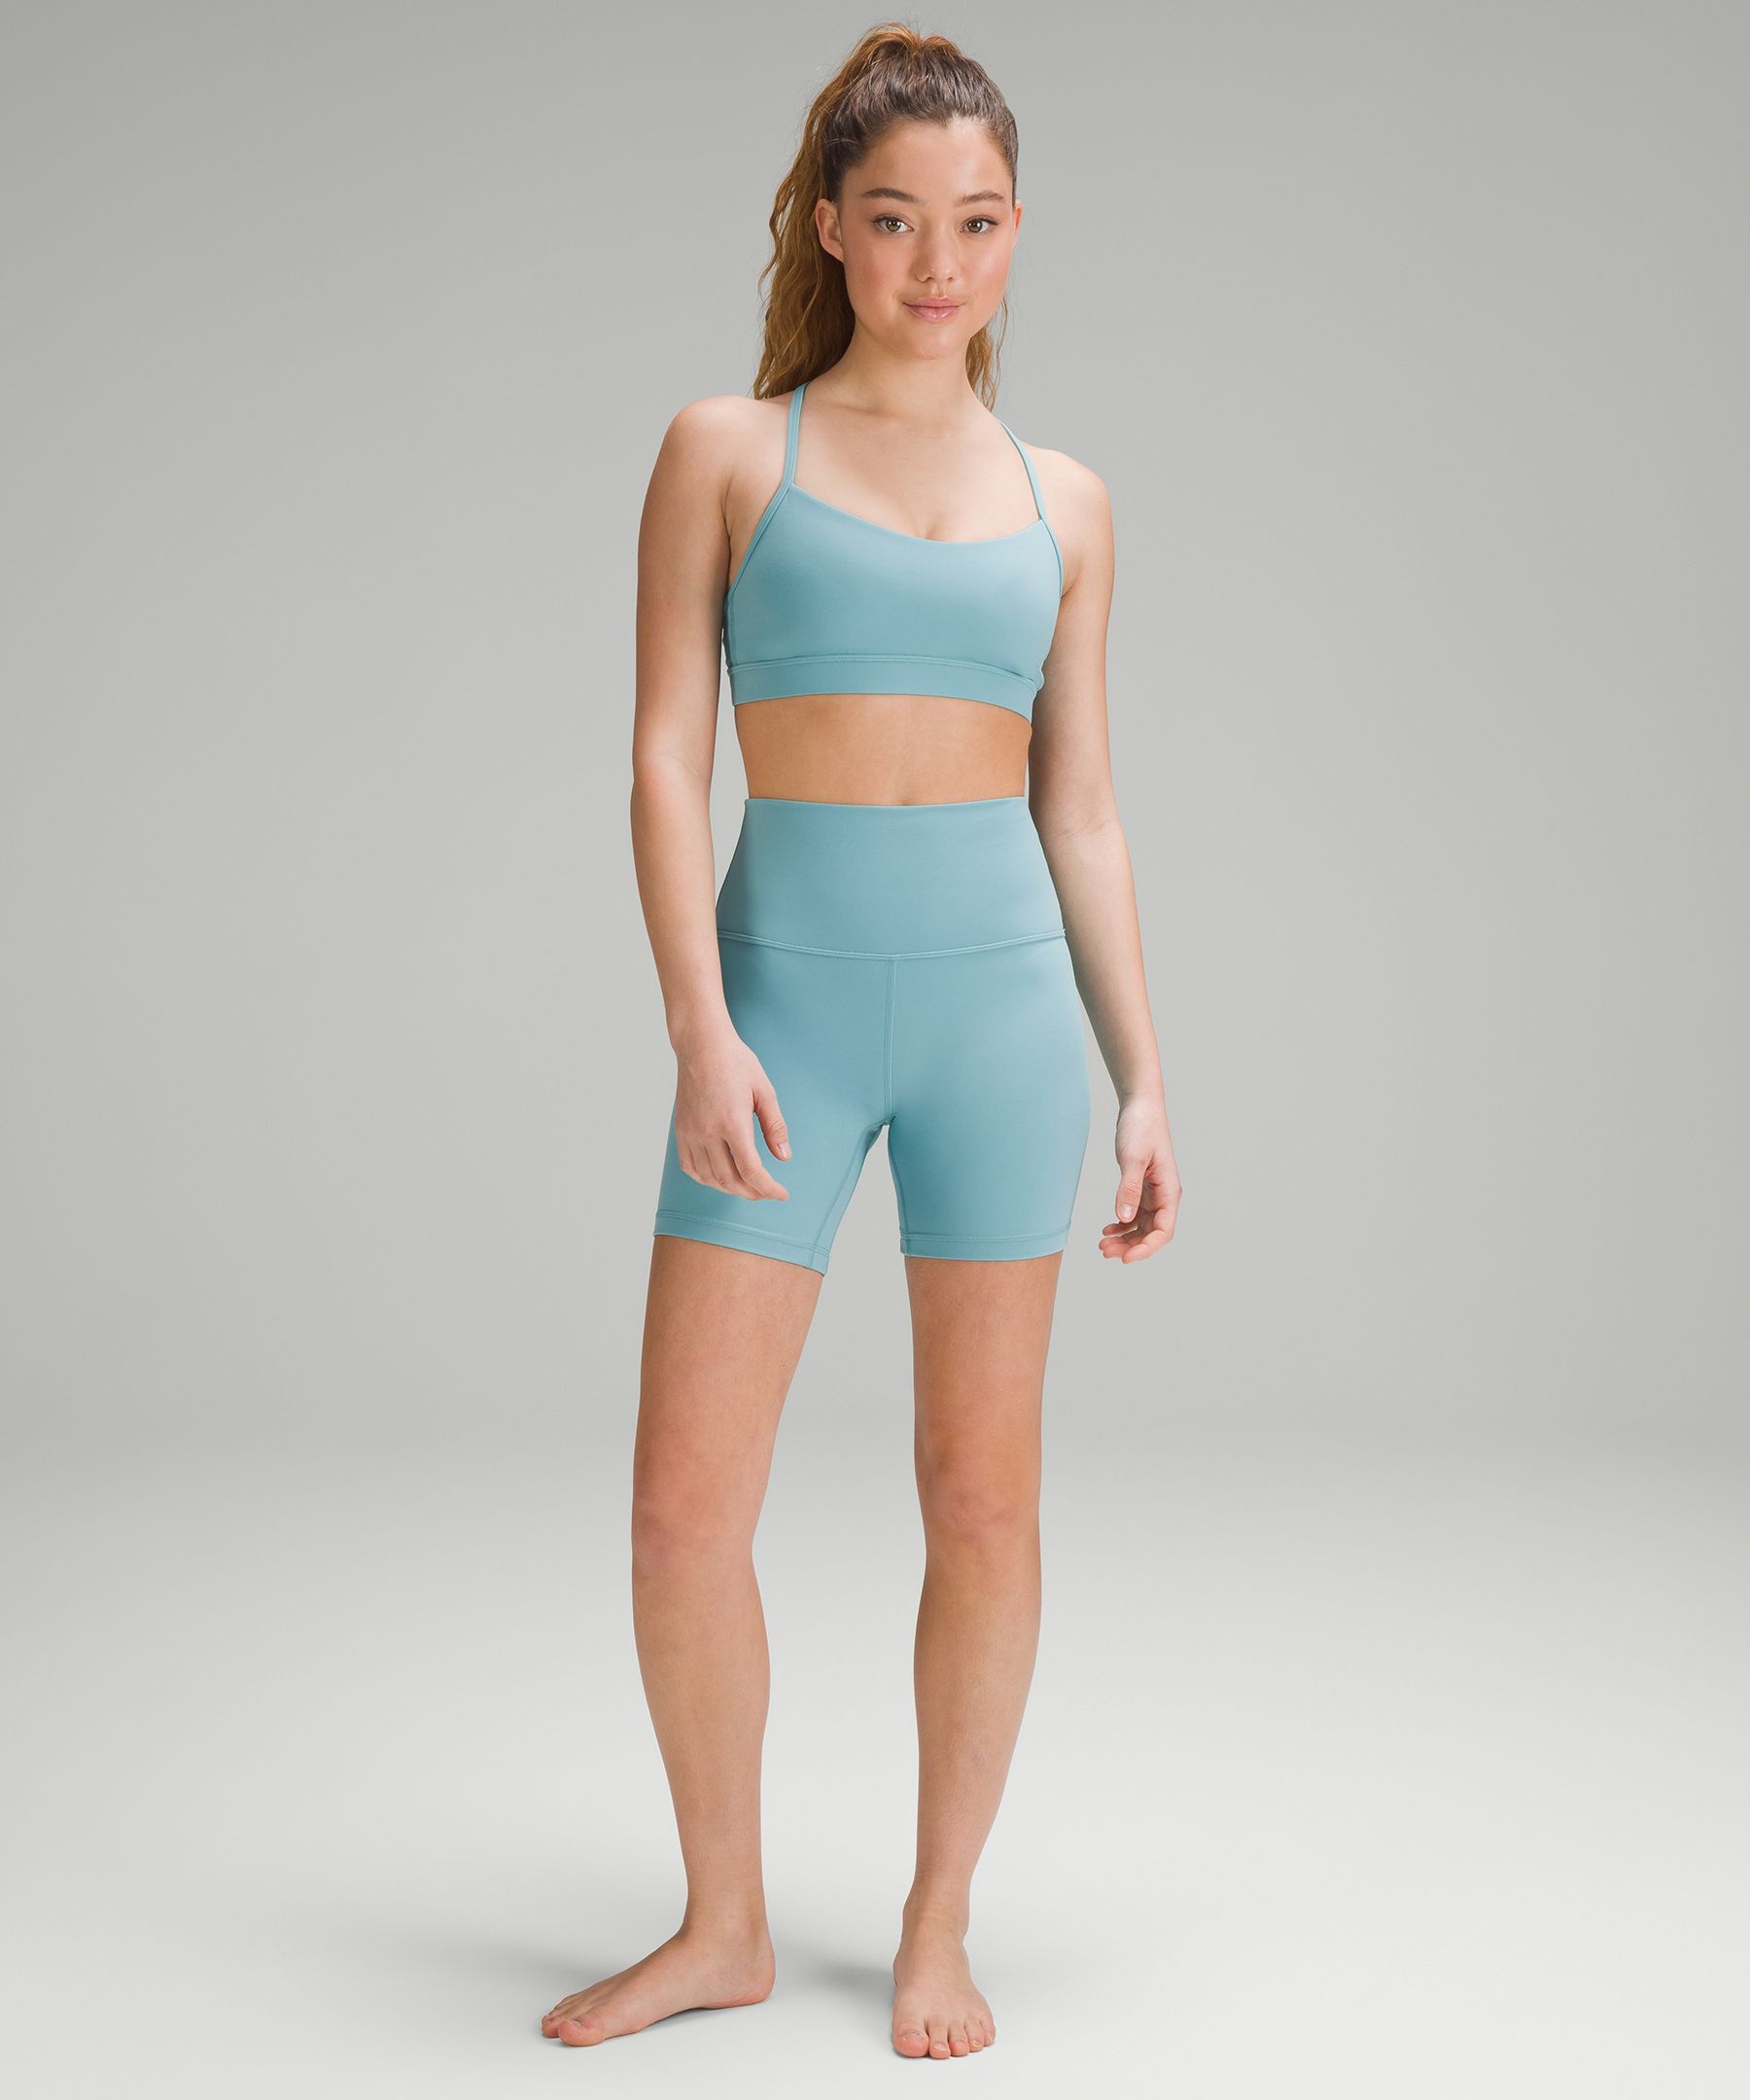 The brighter the better. Lip gloss Align 6” shorts and high-neck